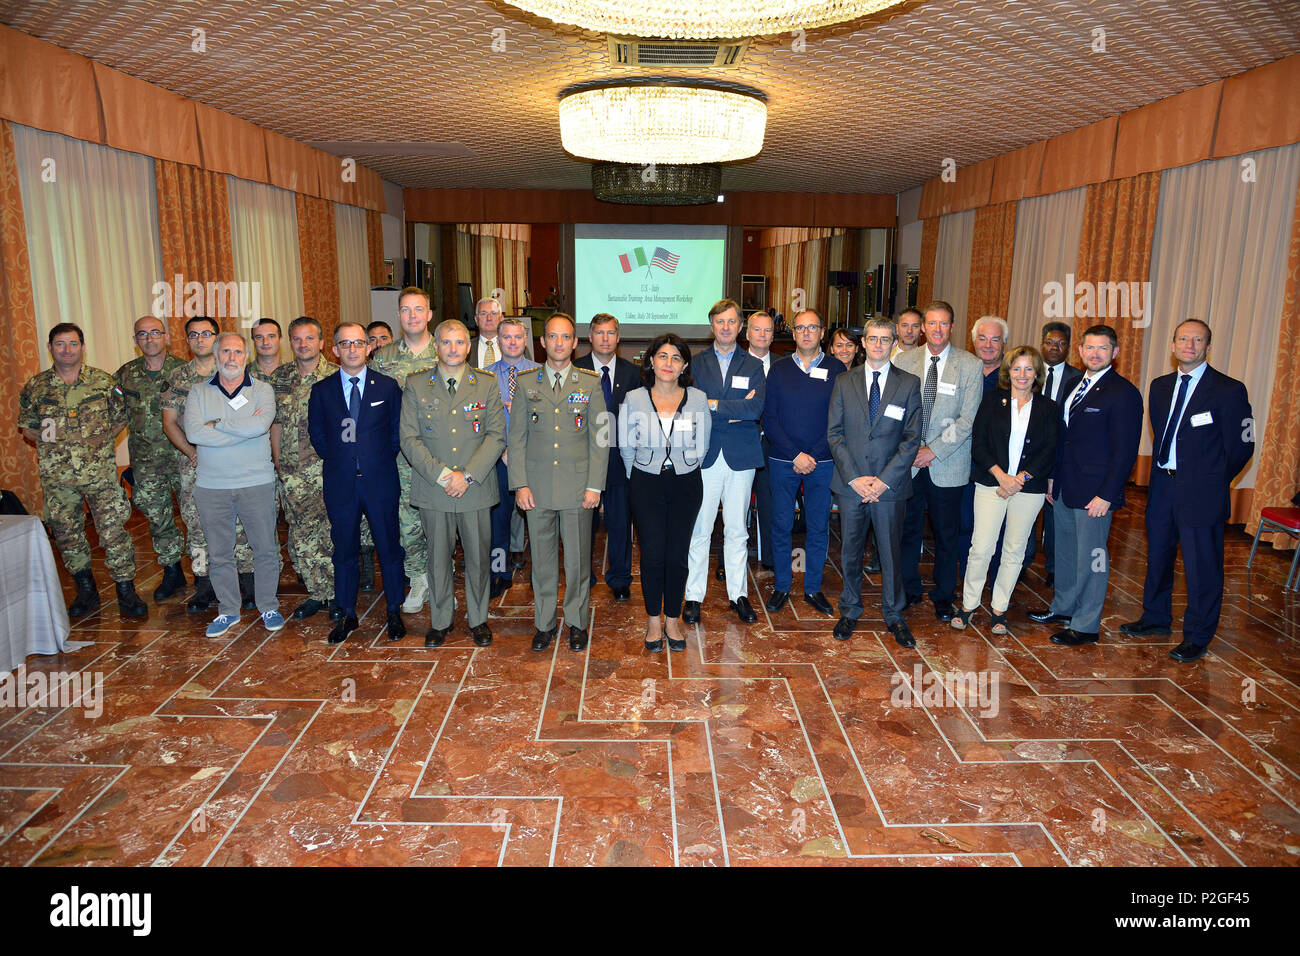 Group photo of the participants at the conference on Sustainable Training Area Management Programs, in Udine, Italy, 20 Sept. 2016. (U.S. Army photo by Visual Information Specialist Paolo Bovo/Released) Stock Photo